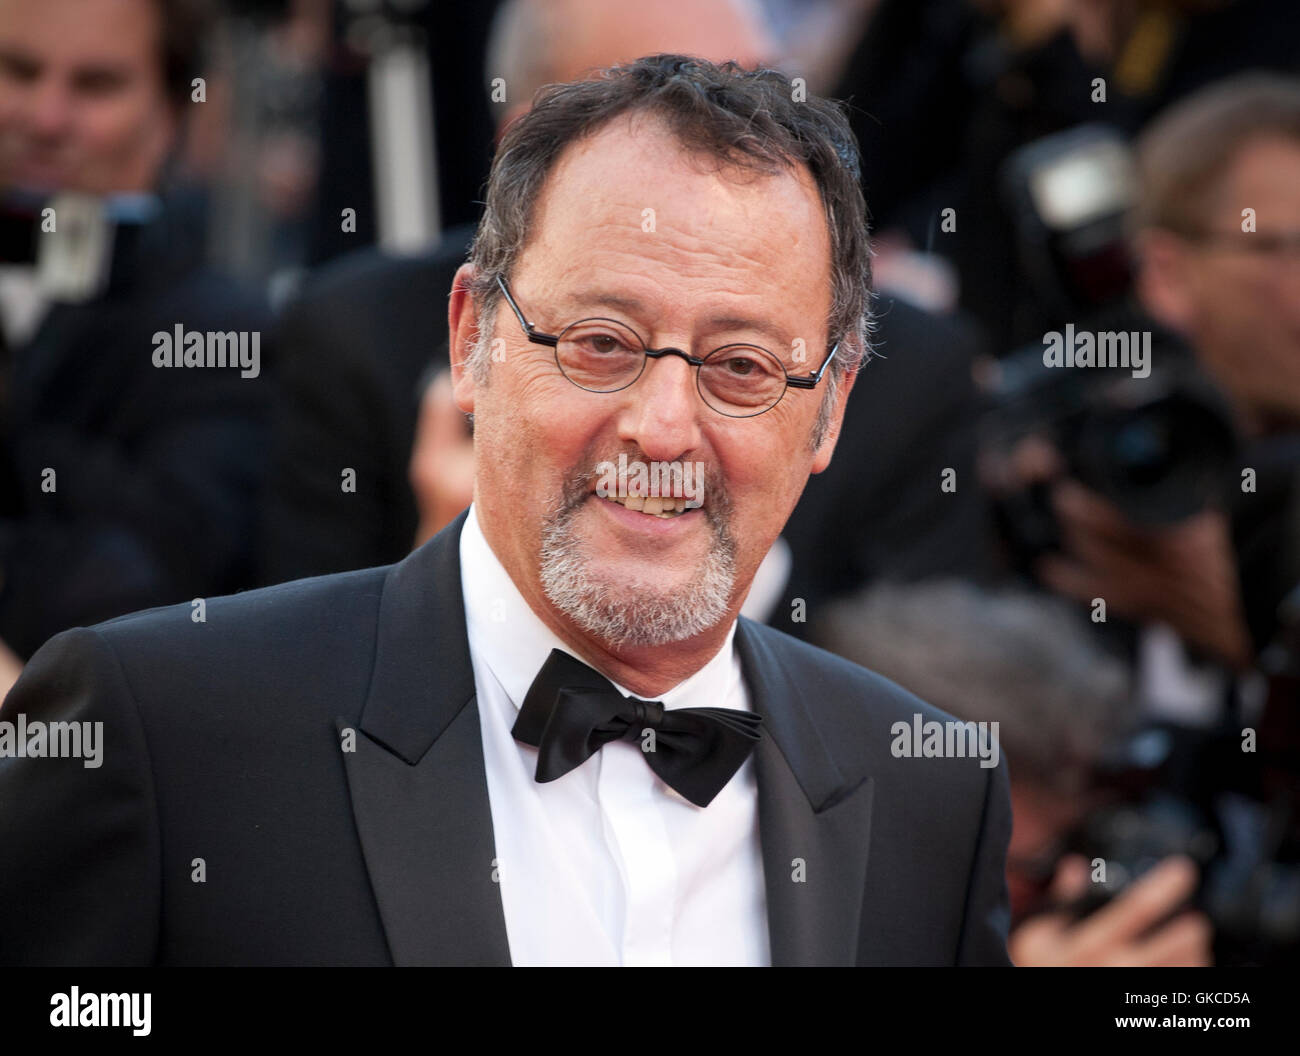 Jean Reno at the gala screening for the film The Last Face at the 69th  Cannes Film Festival, Friday 20th May 2016, Cannes Stock Photo - Alamy